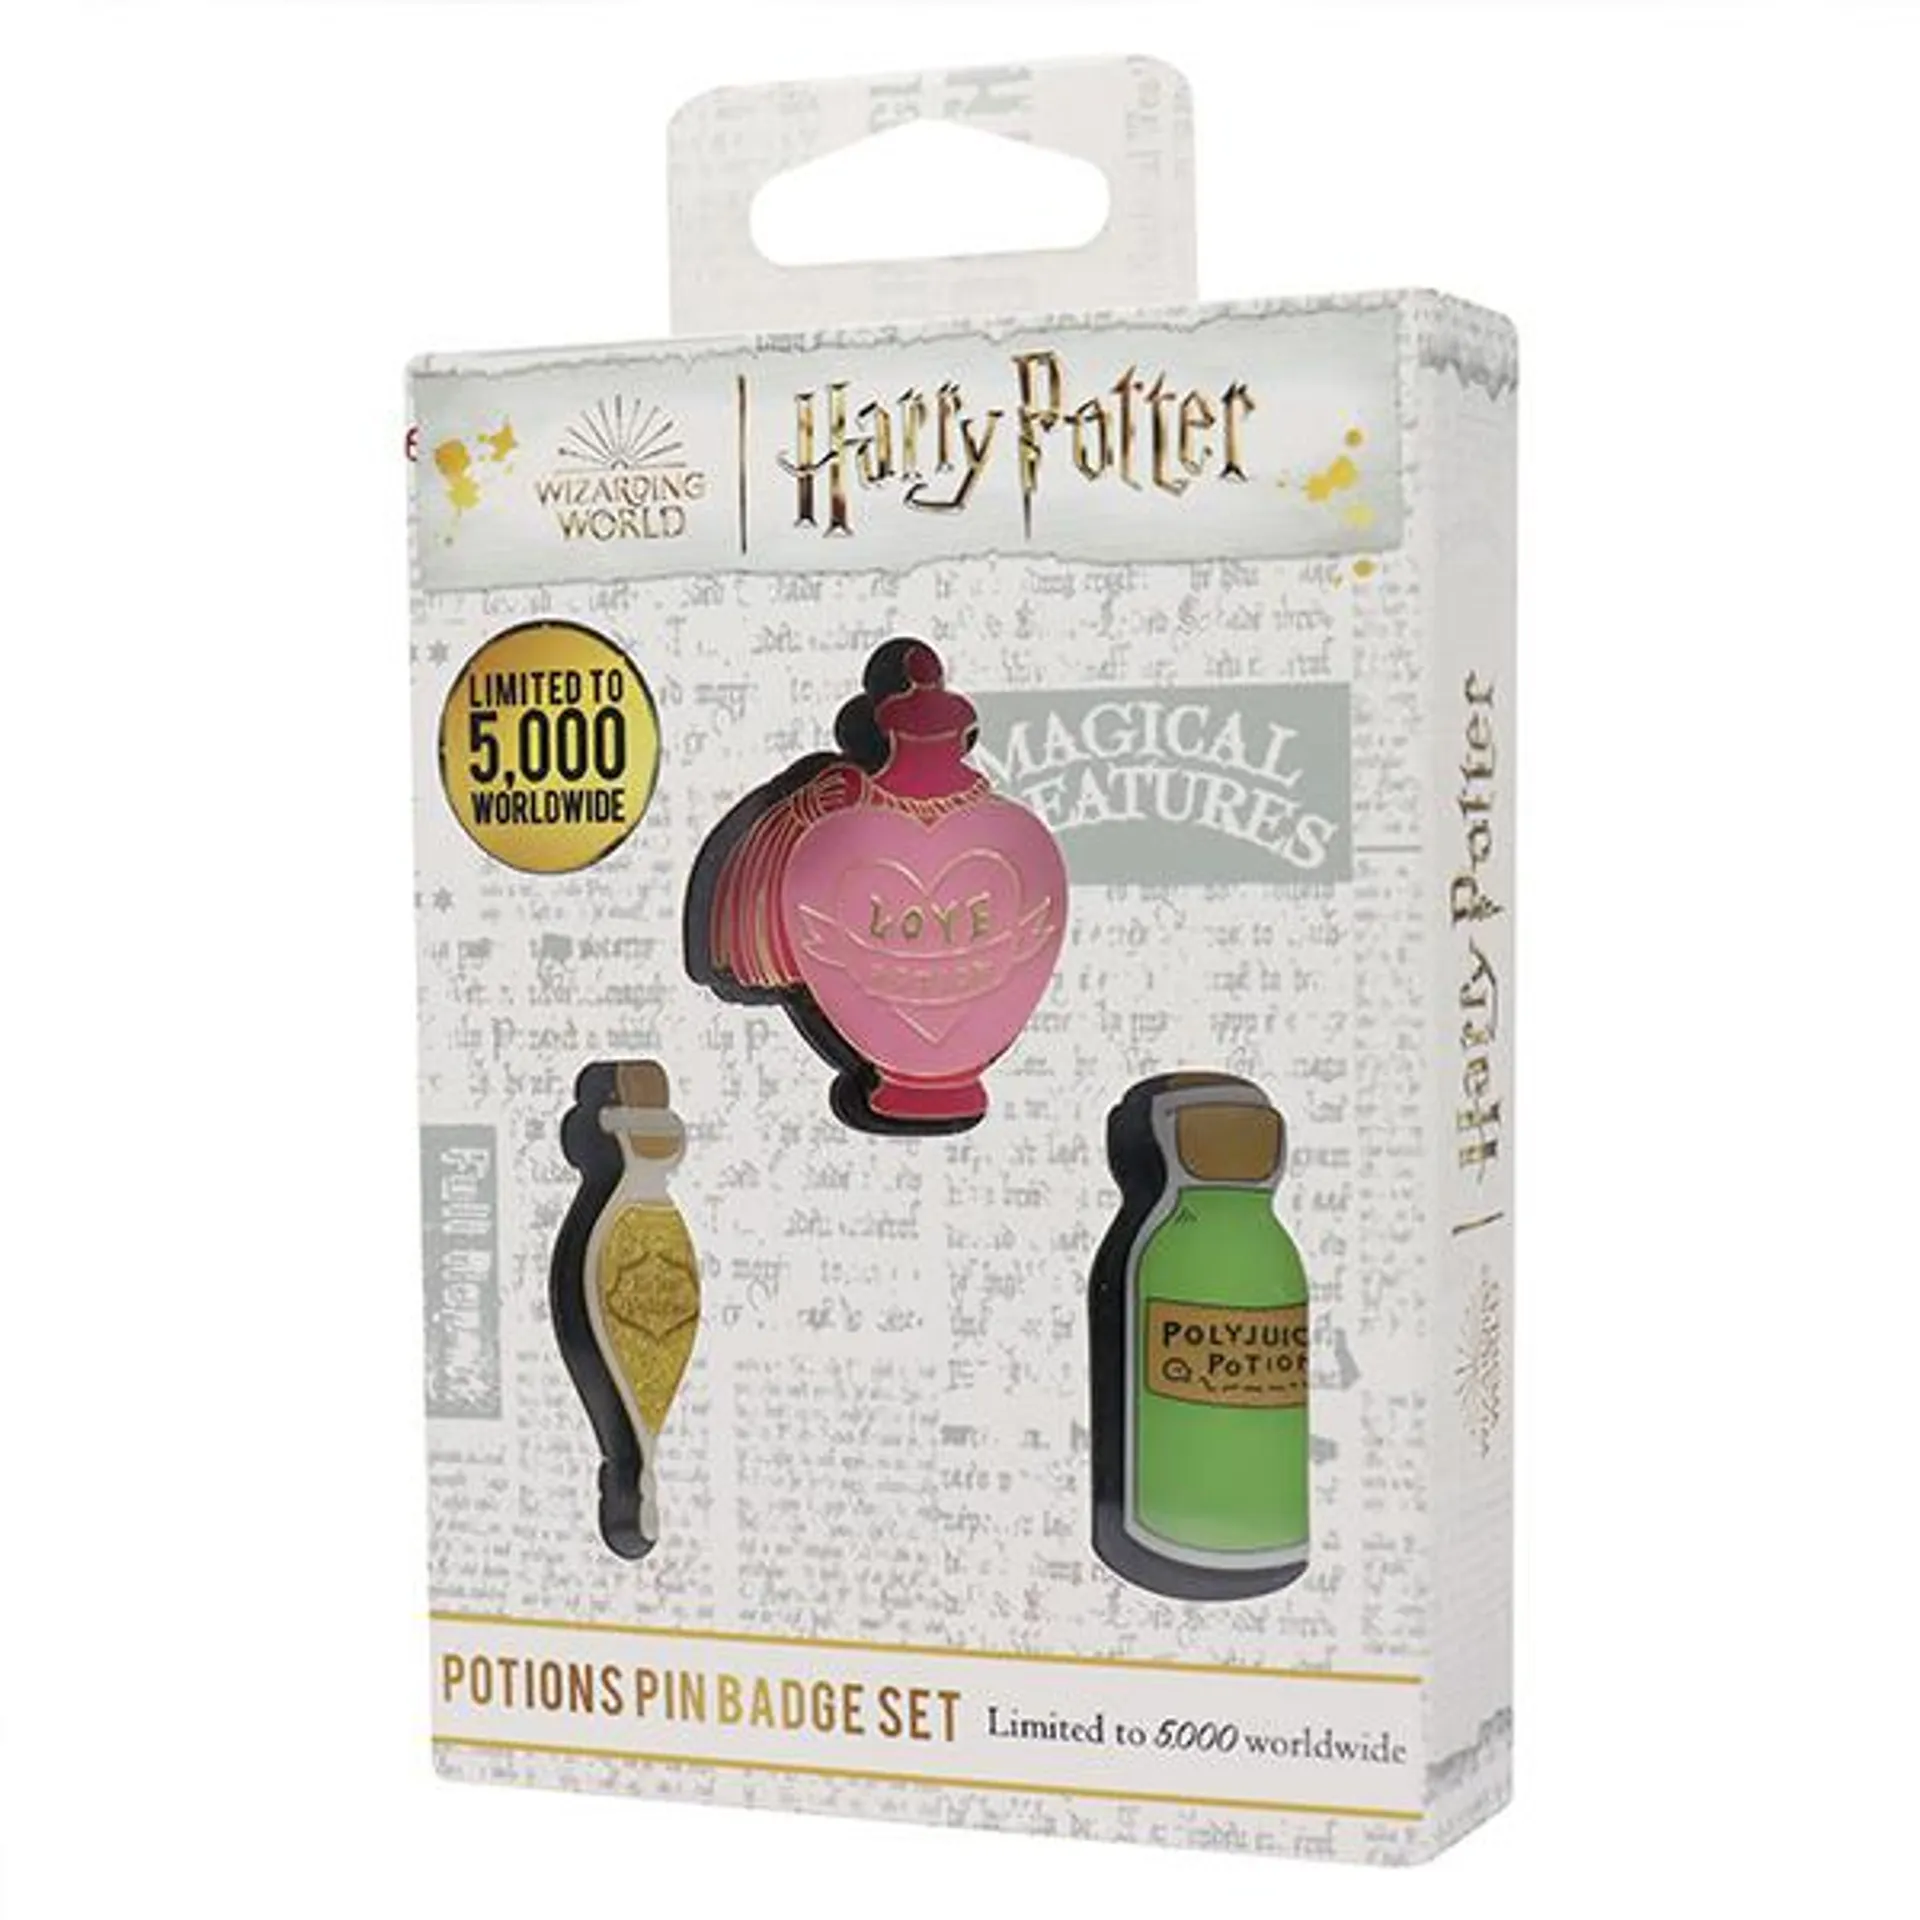 Harry Potter Limited Edition Set of 3 Potions Pin Badges